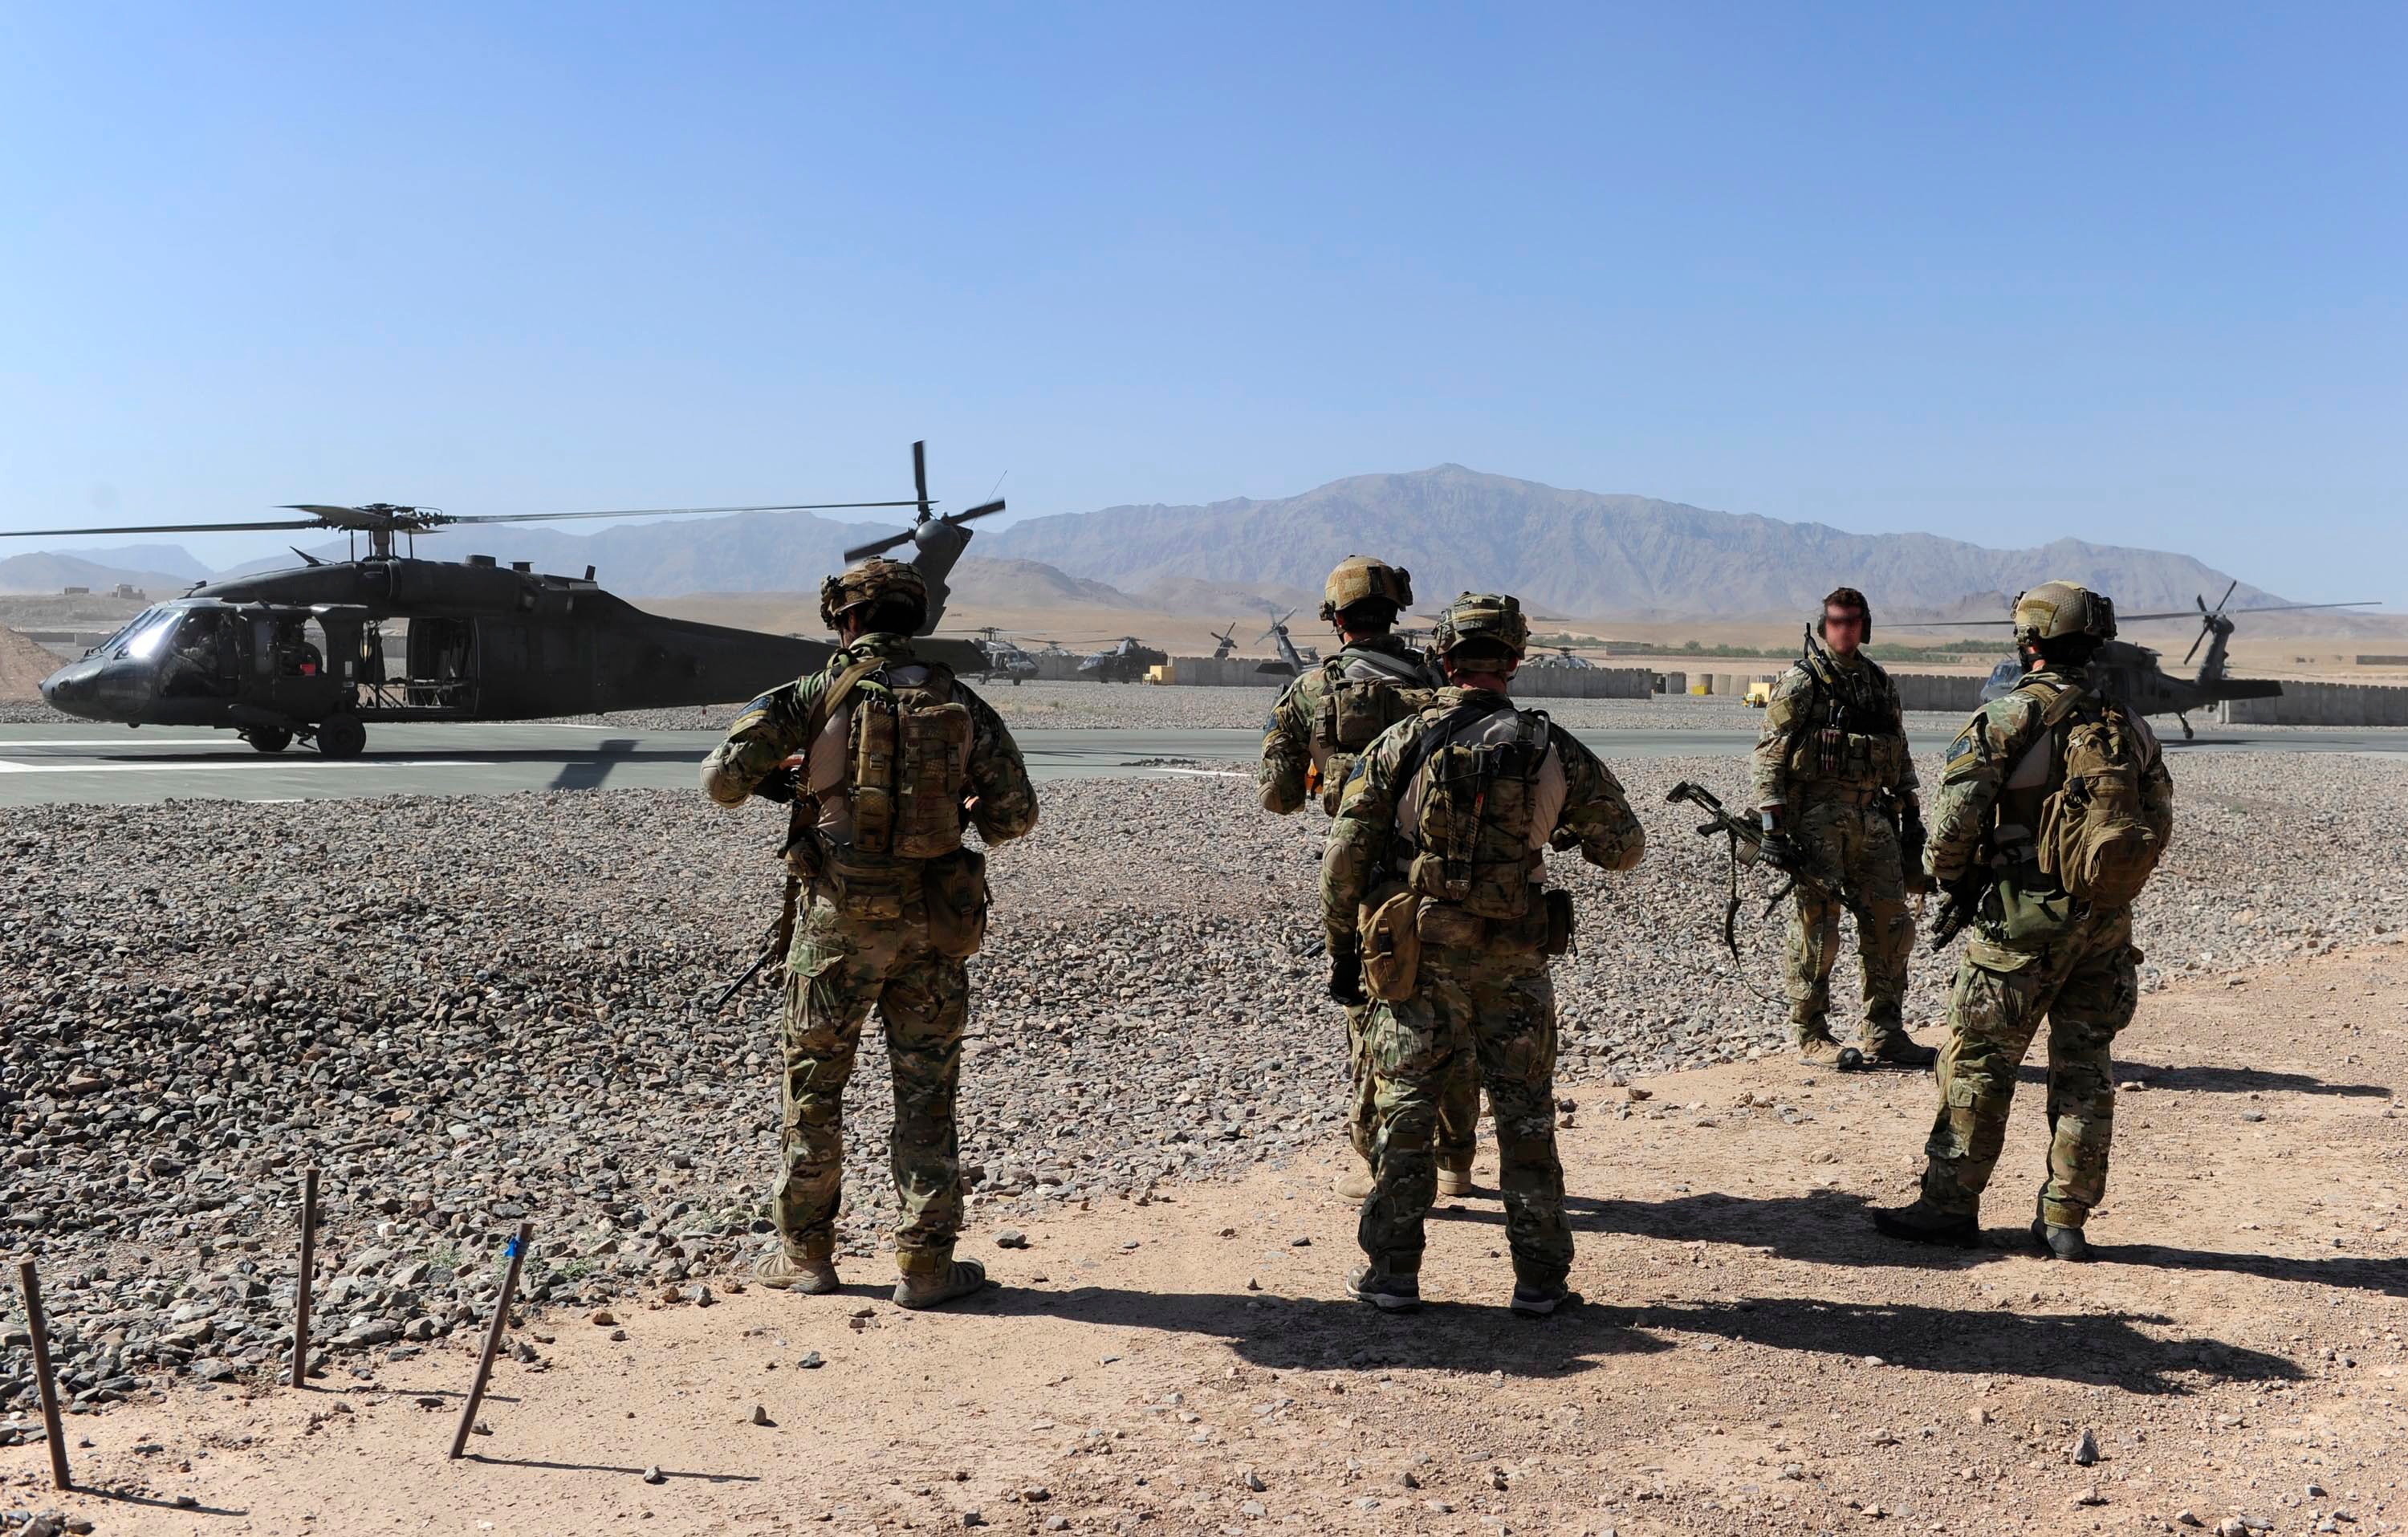 Australian special forces in Afghanistan in 2013.